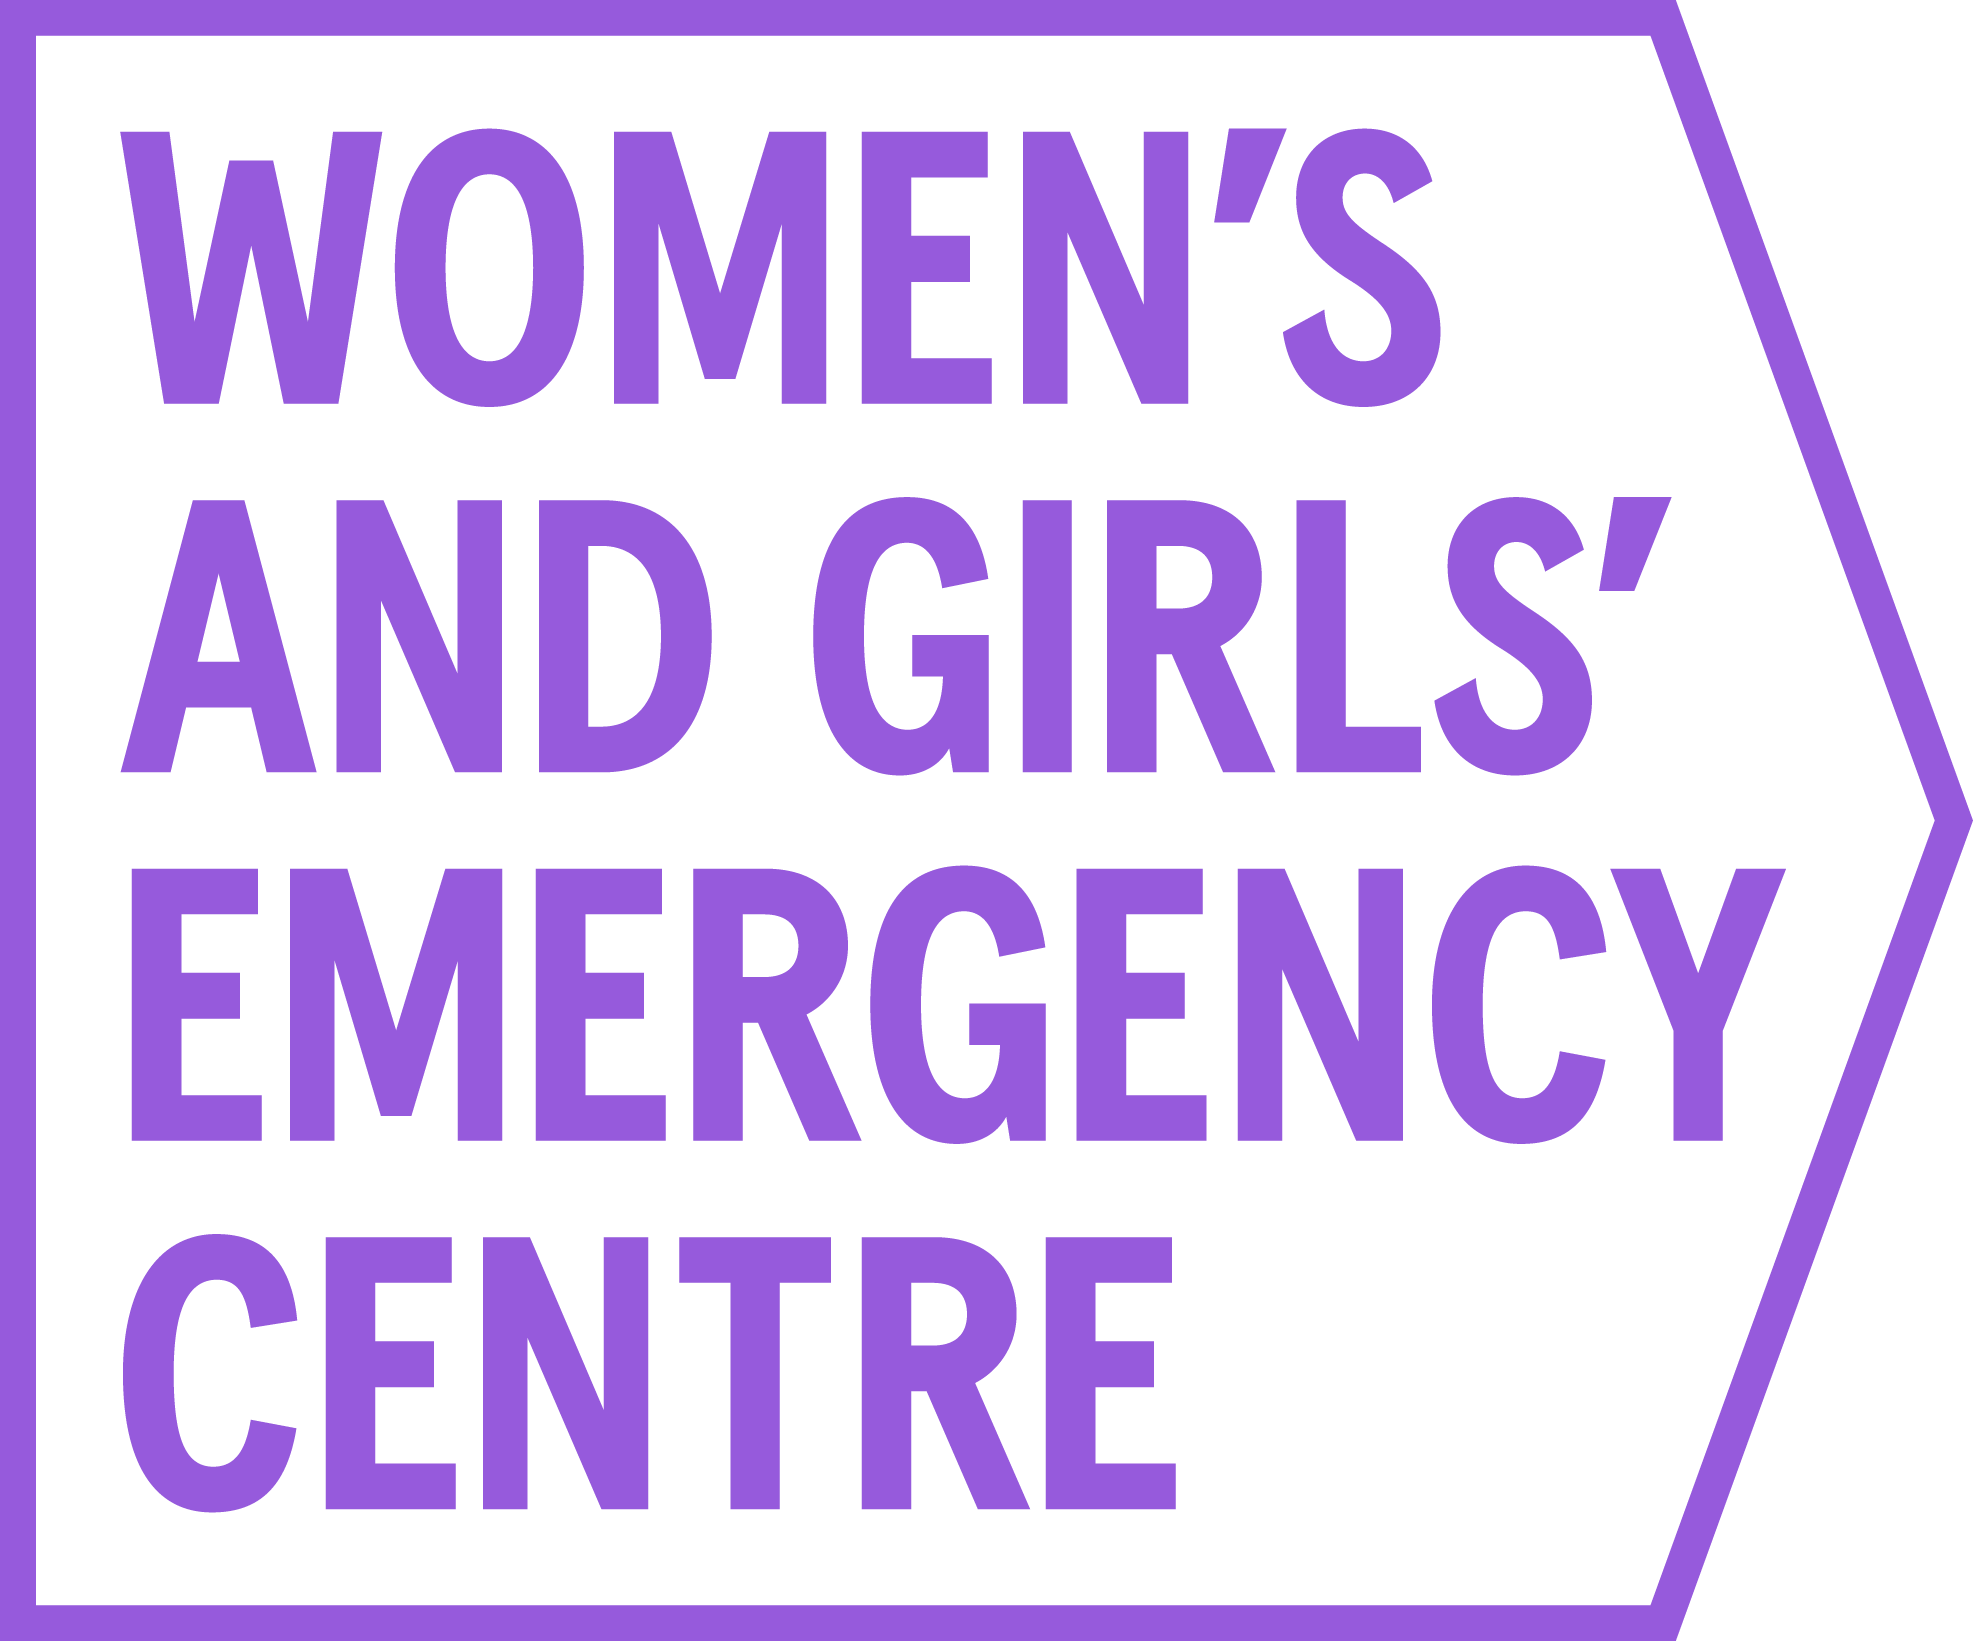 Women’s and Girls Emergency Centre (WAGEC)